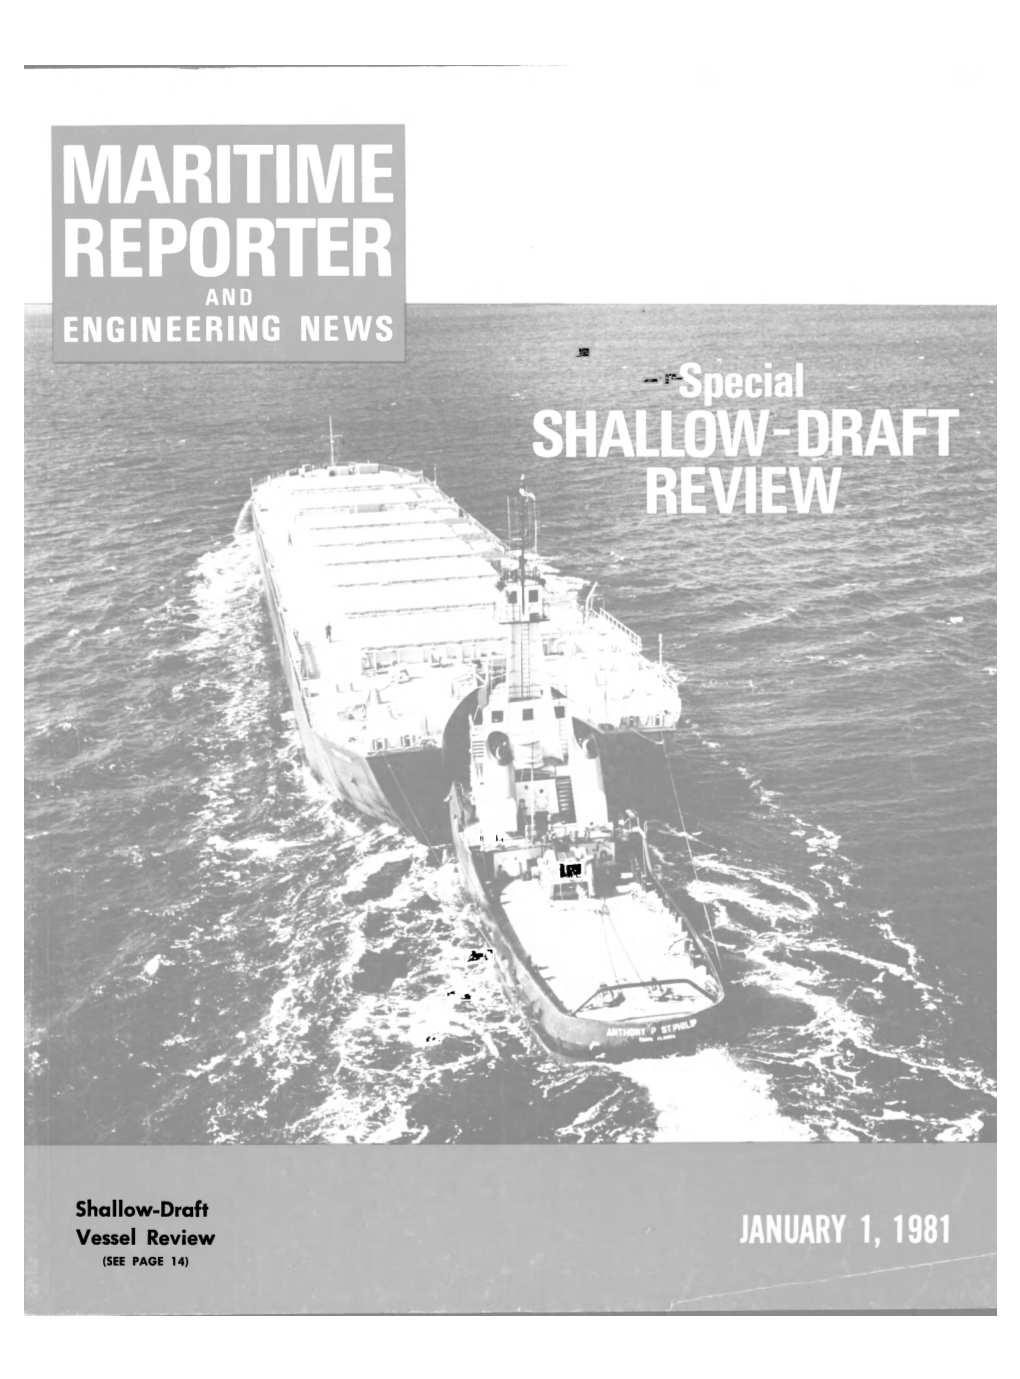 Maritime Reporter and • Engineering News 7